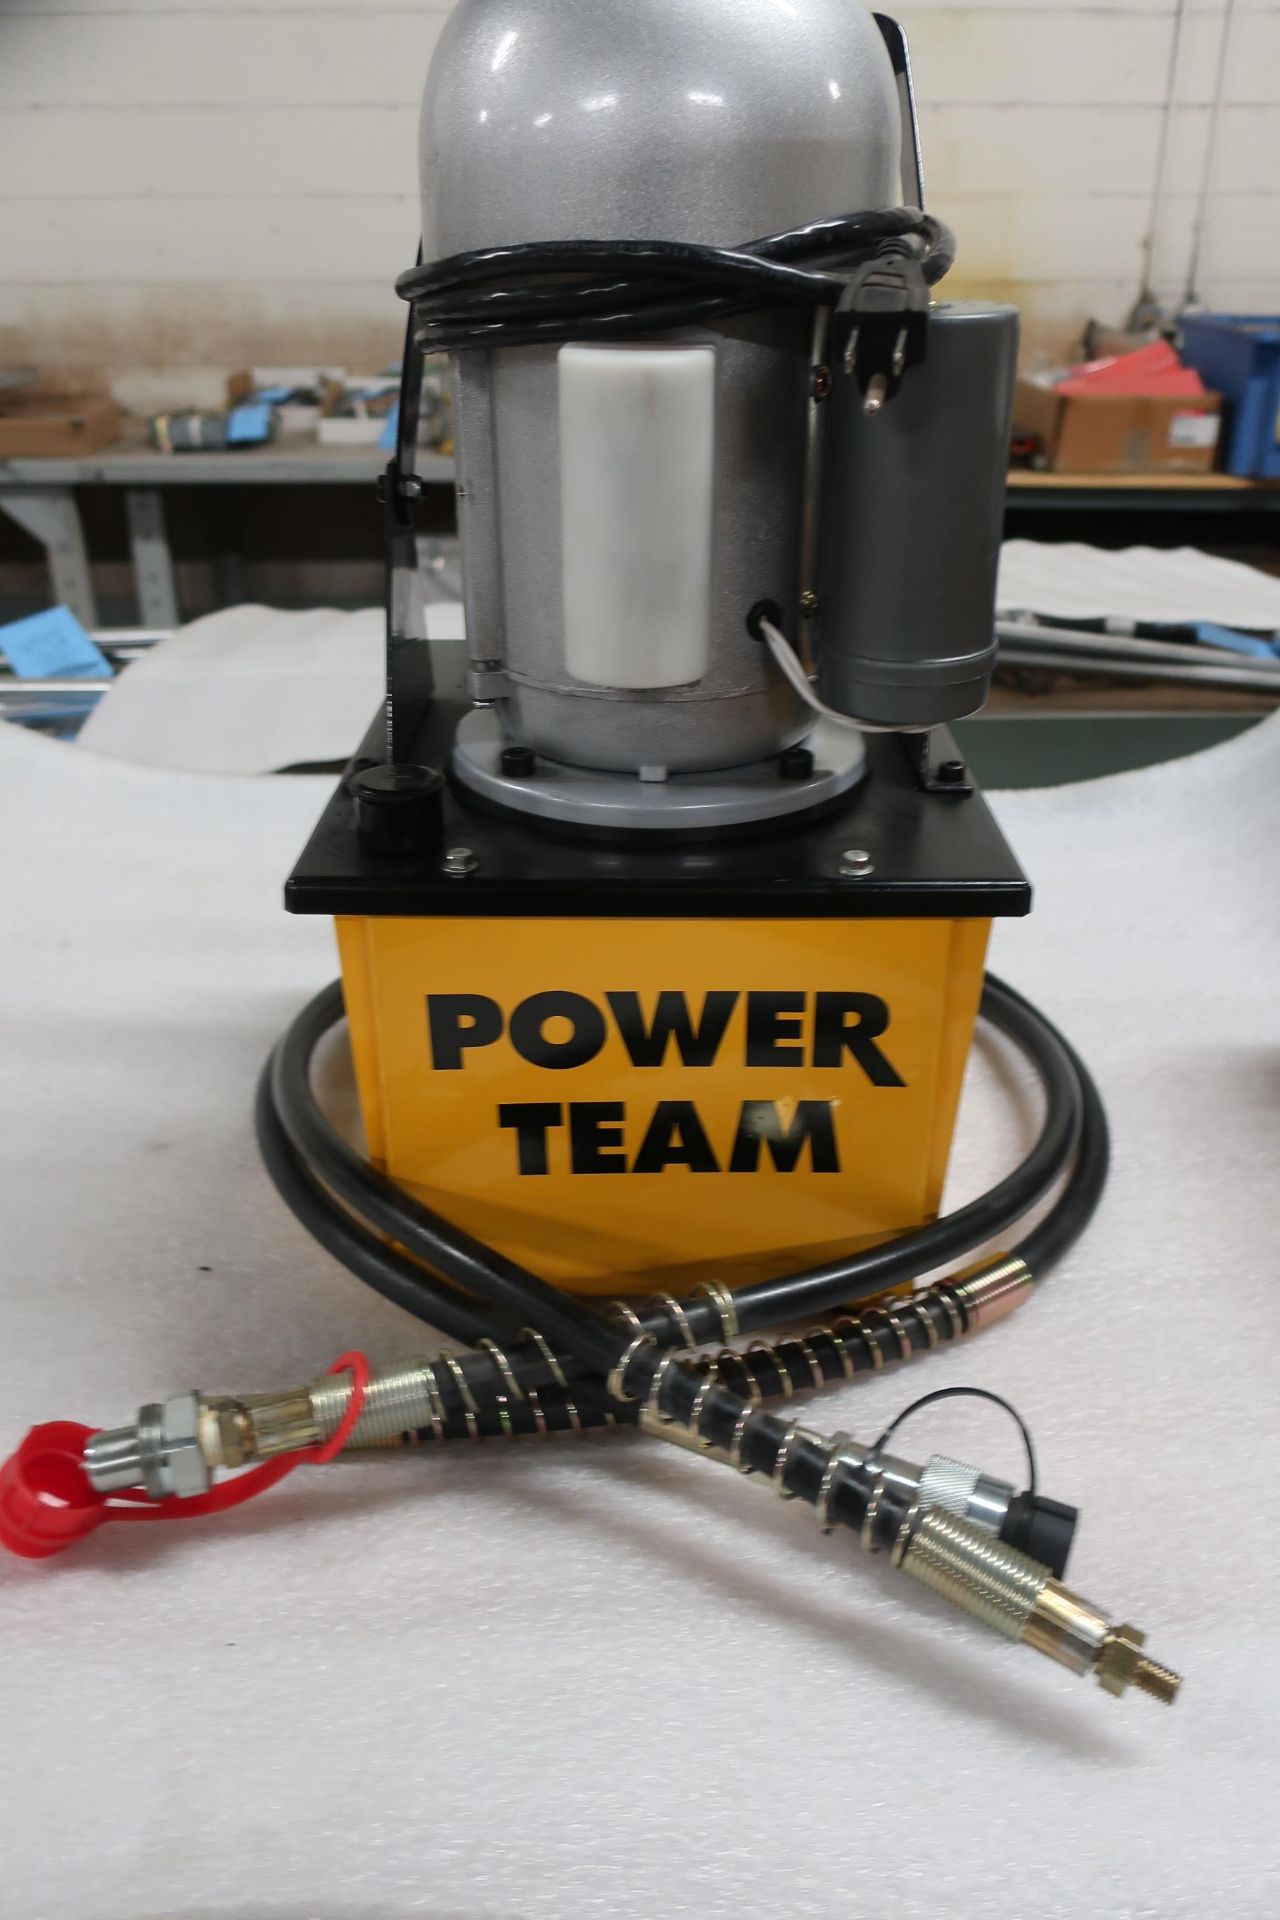 Power Team Hydraulics Electric Powerpack type - 120V single phase hydraulic pump - UNUSED & MINT - Image 2 of 2